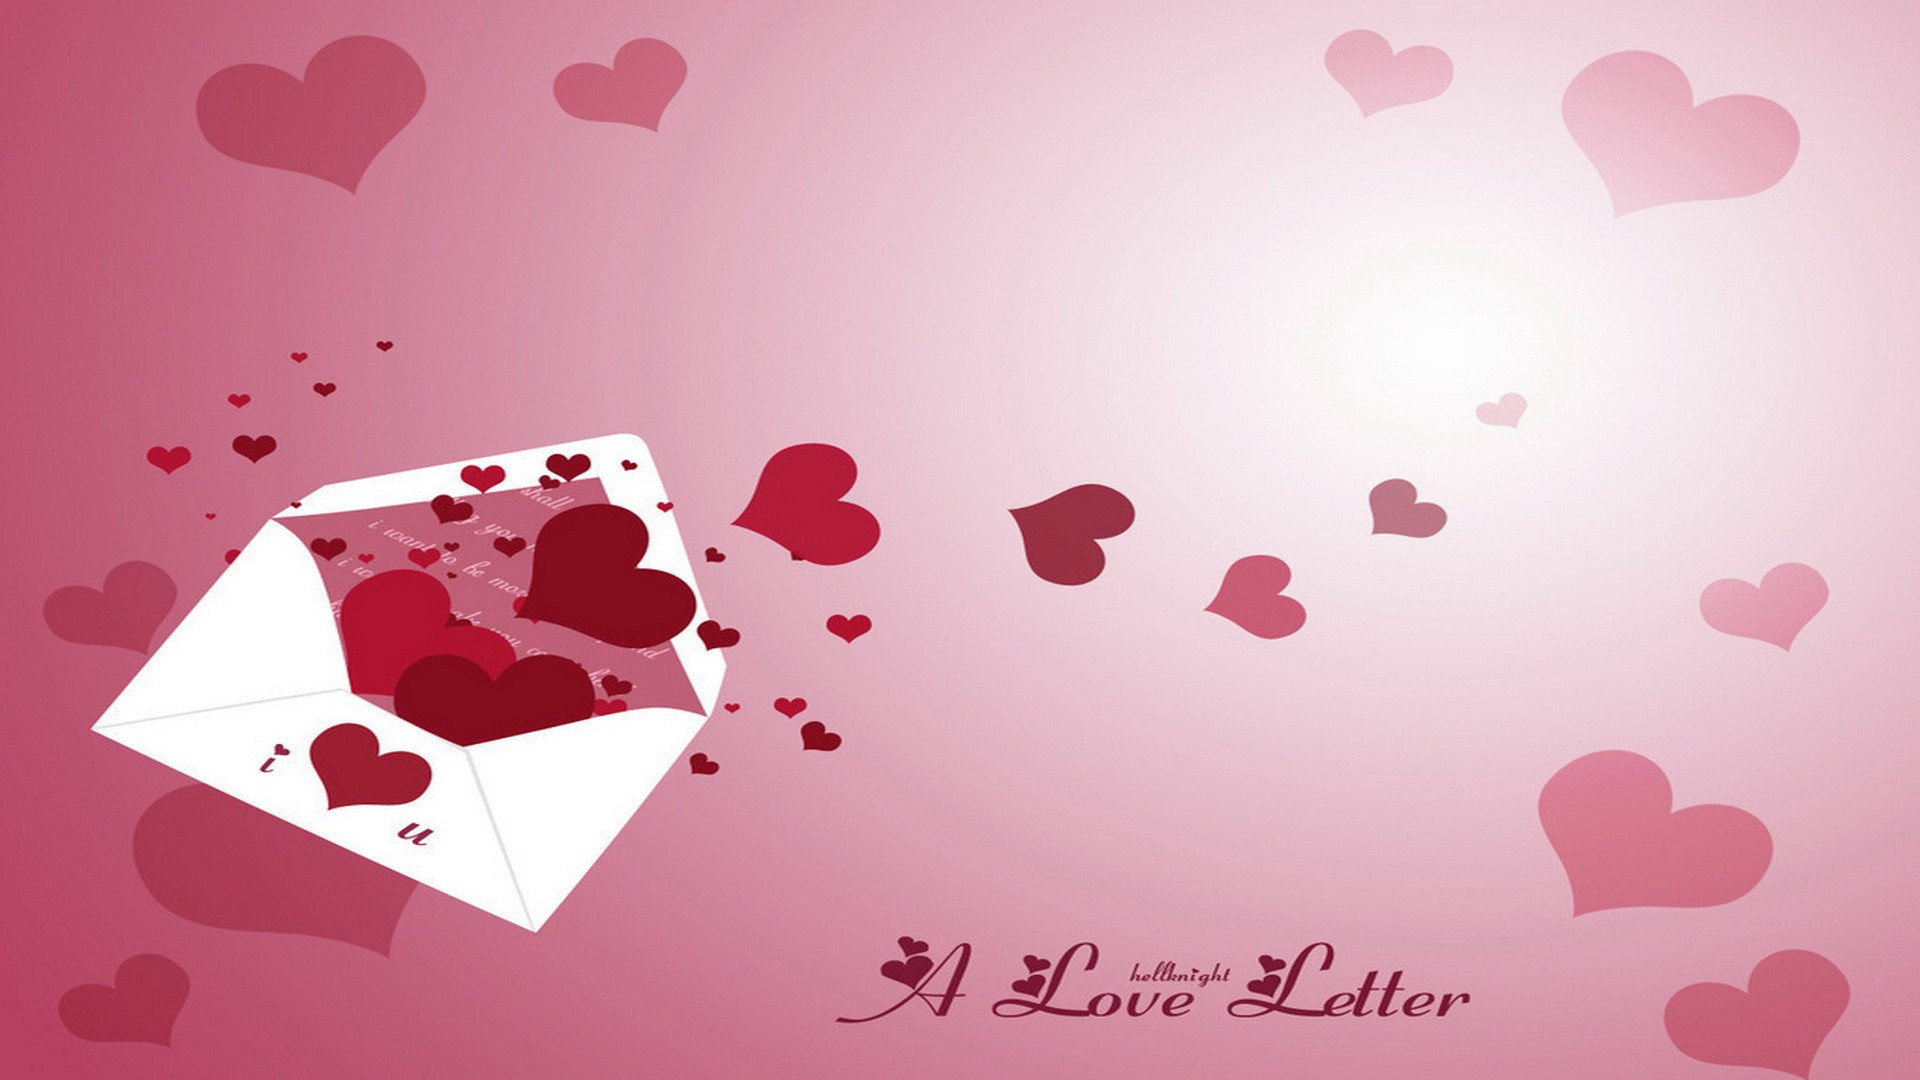 Valentine Wallpapers, Pictures, Images1920 x 1080